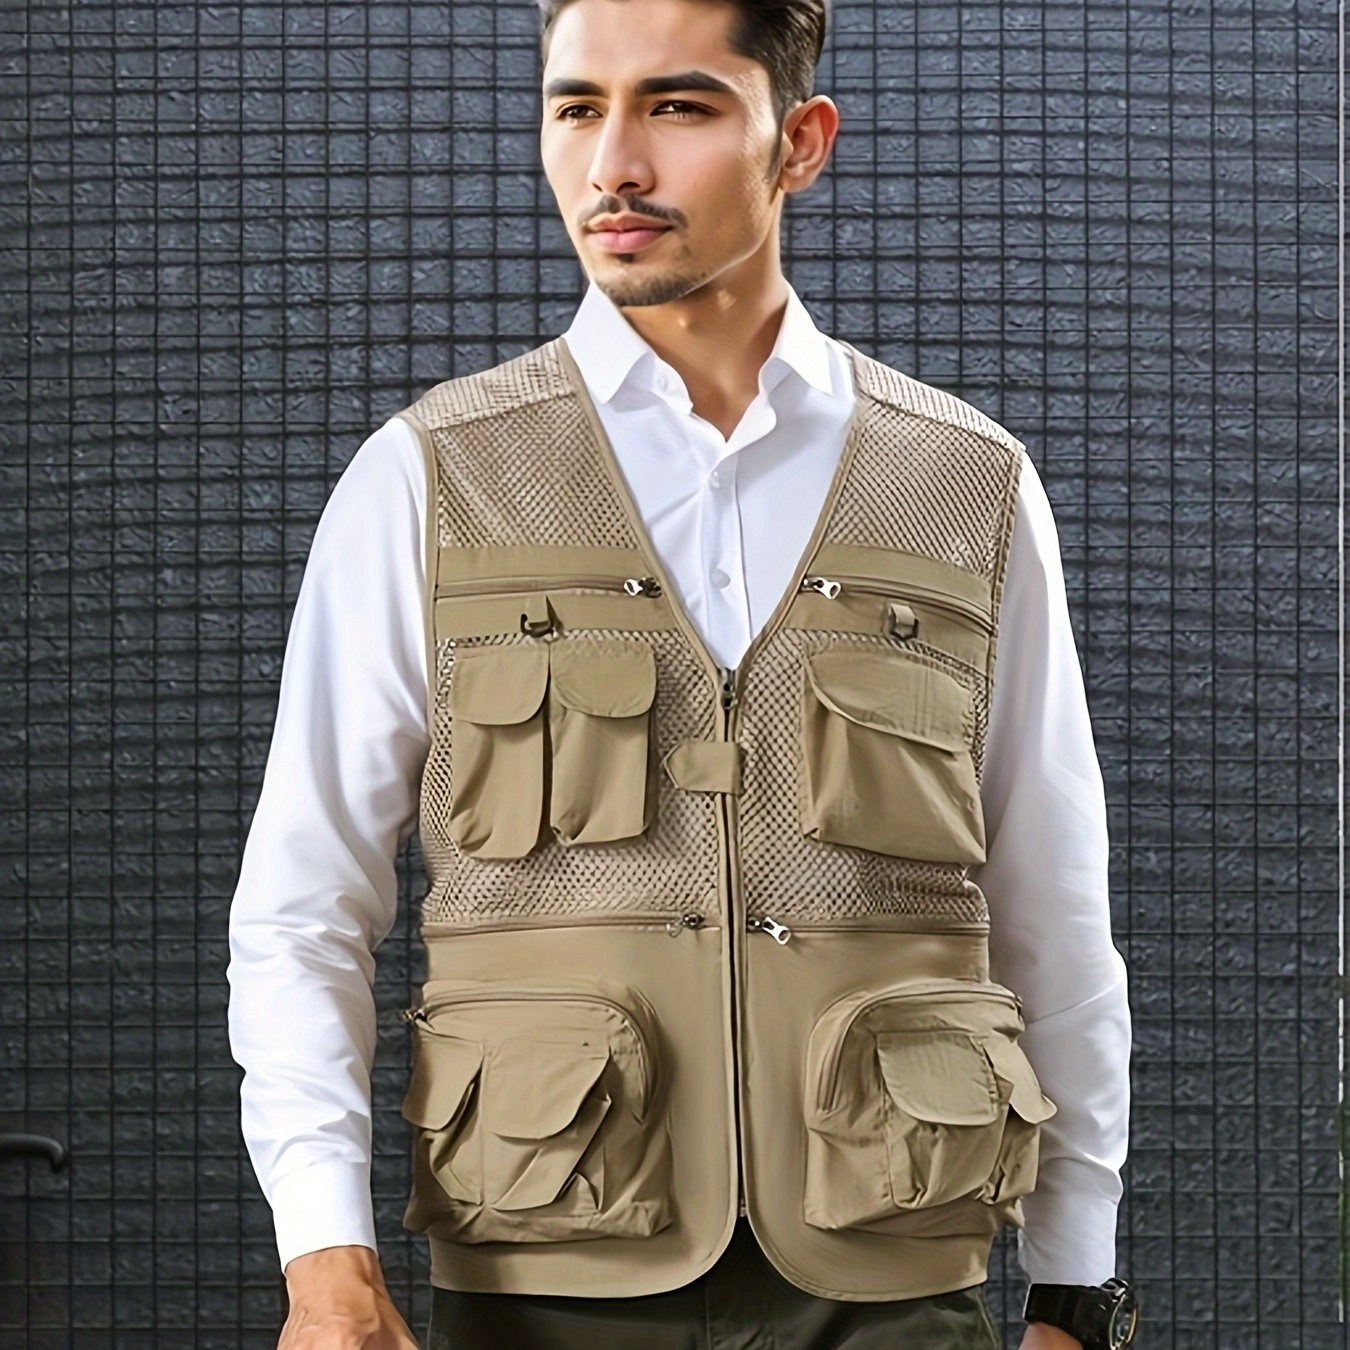 TMOYZQ Men's Outdoor Fishing Vest Casual Work Mesh Lined Vests Breathable  Waterproof Travel Photo Cargo Vest Jacket with Multi Pockets, Available in  Plus Size 